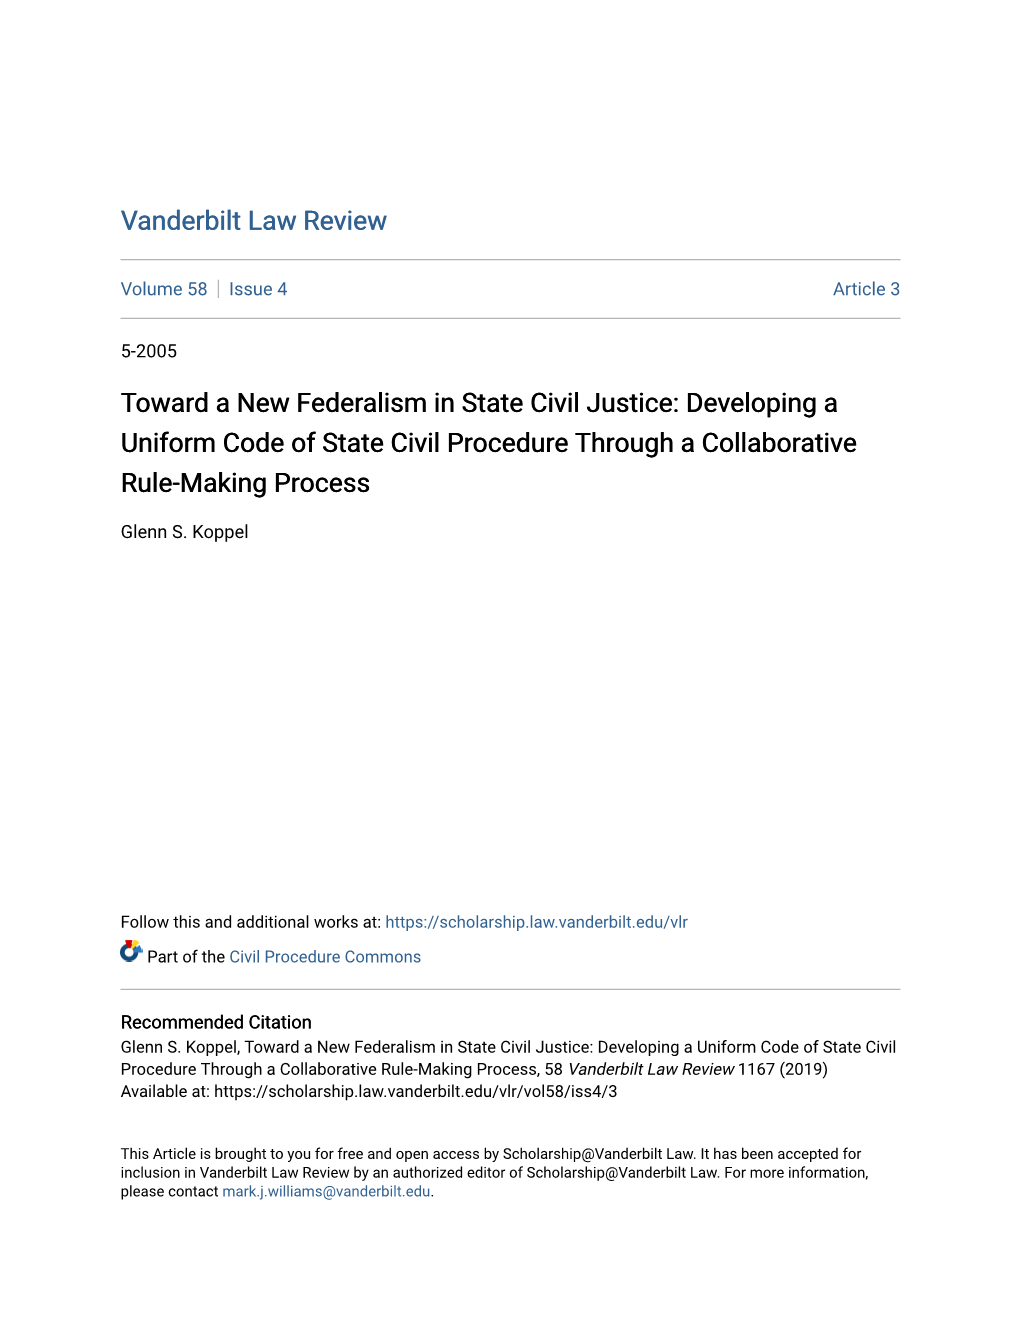 Toward a New Federalism in State Civil Justice: Developing a Uniform Code of State Civil Procedure Through a Collaborative Rule-Making Process